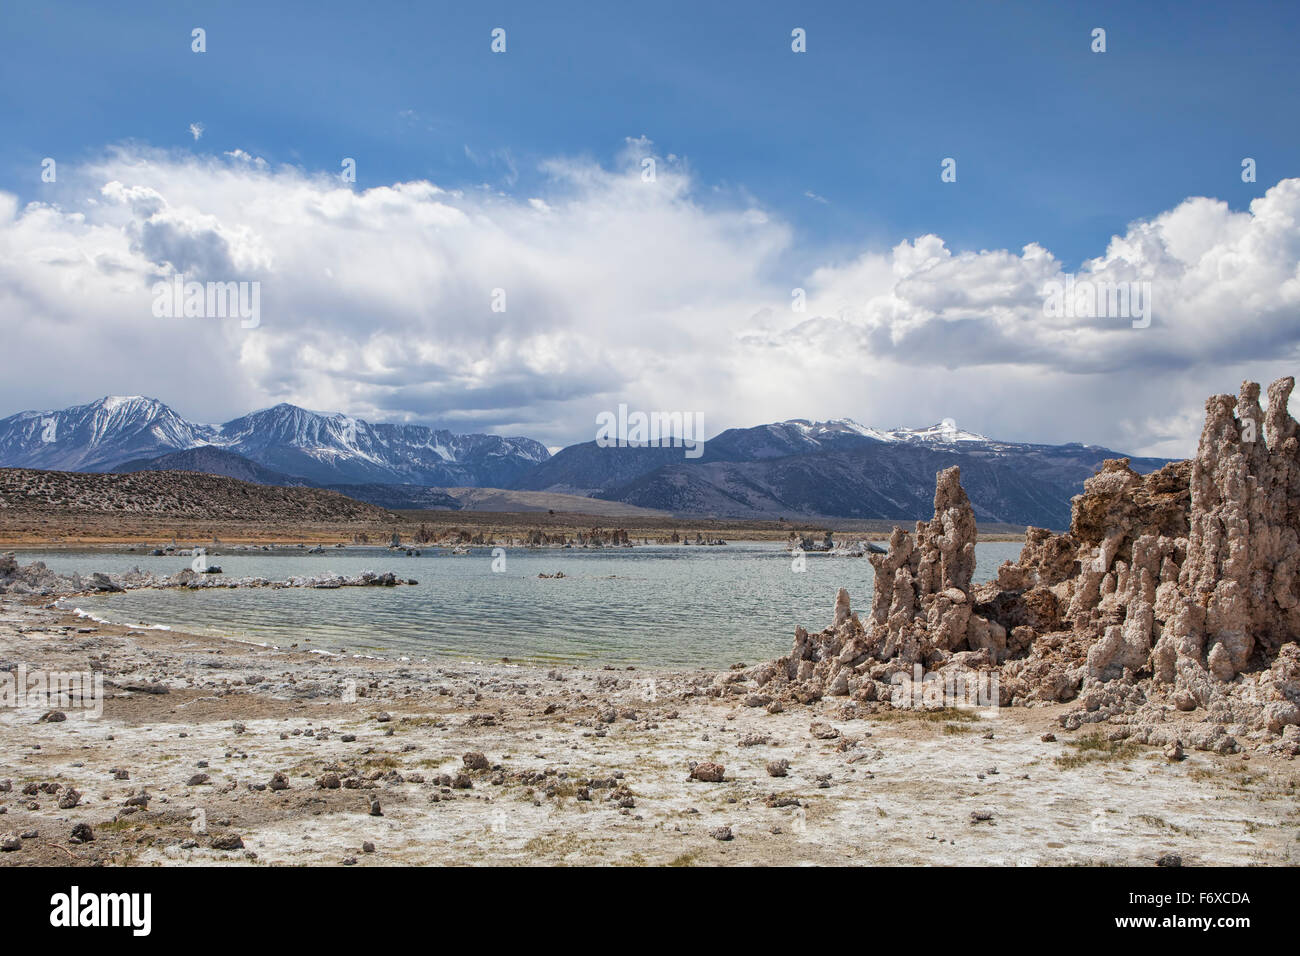 Mono Lake in California with tufa towers and clouds building over the mountains. Stock Photo